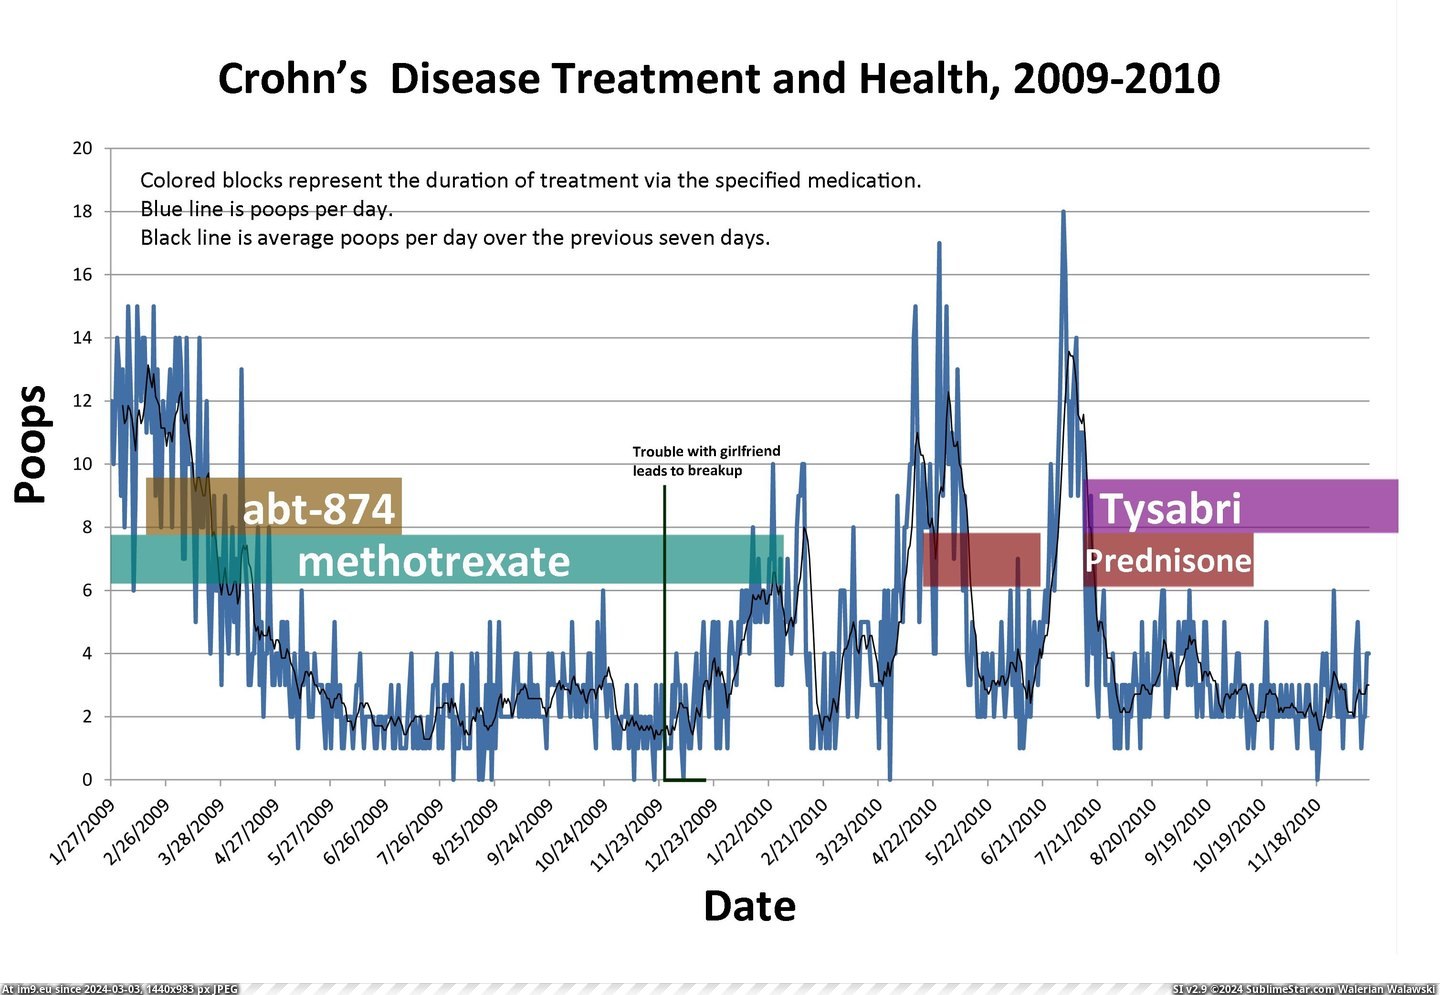 #Day #Years #Treatment #Poops #Crohn #Two #Disease [Dataisbeautiful] [OC] Two years of Crohn's Disease treatment: my poops per day from 2009-2010 Pic. (Image of album My r/DATAISBEAUTIFUL favs))